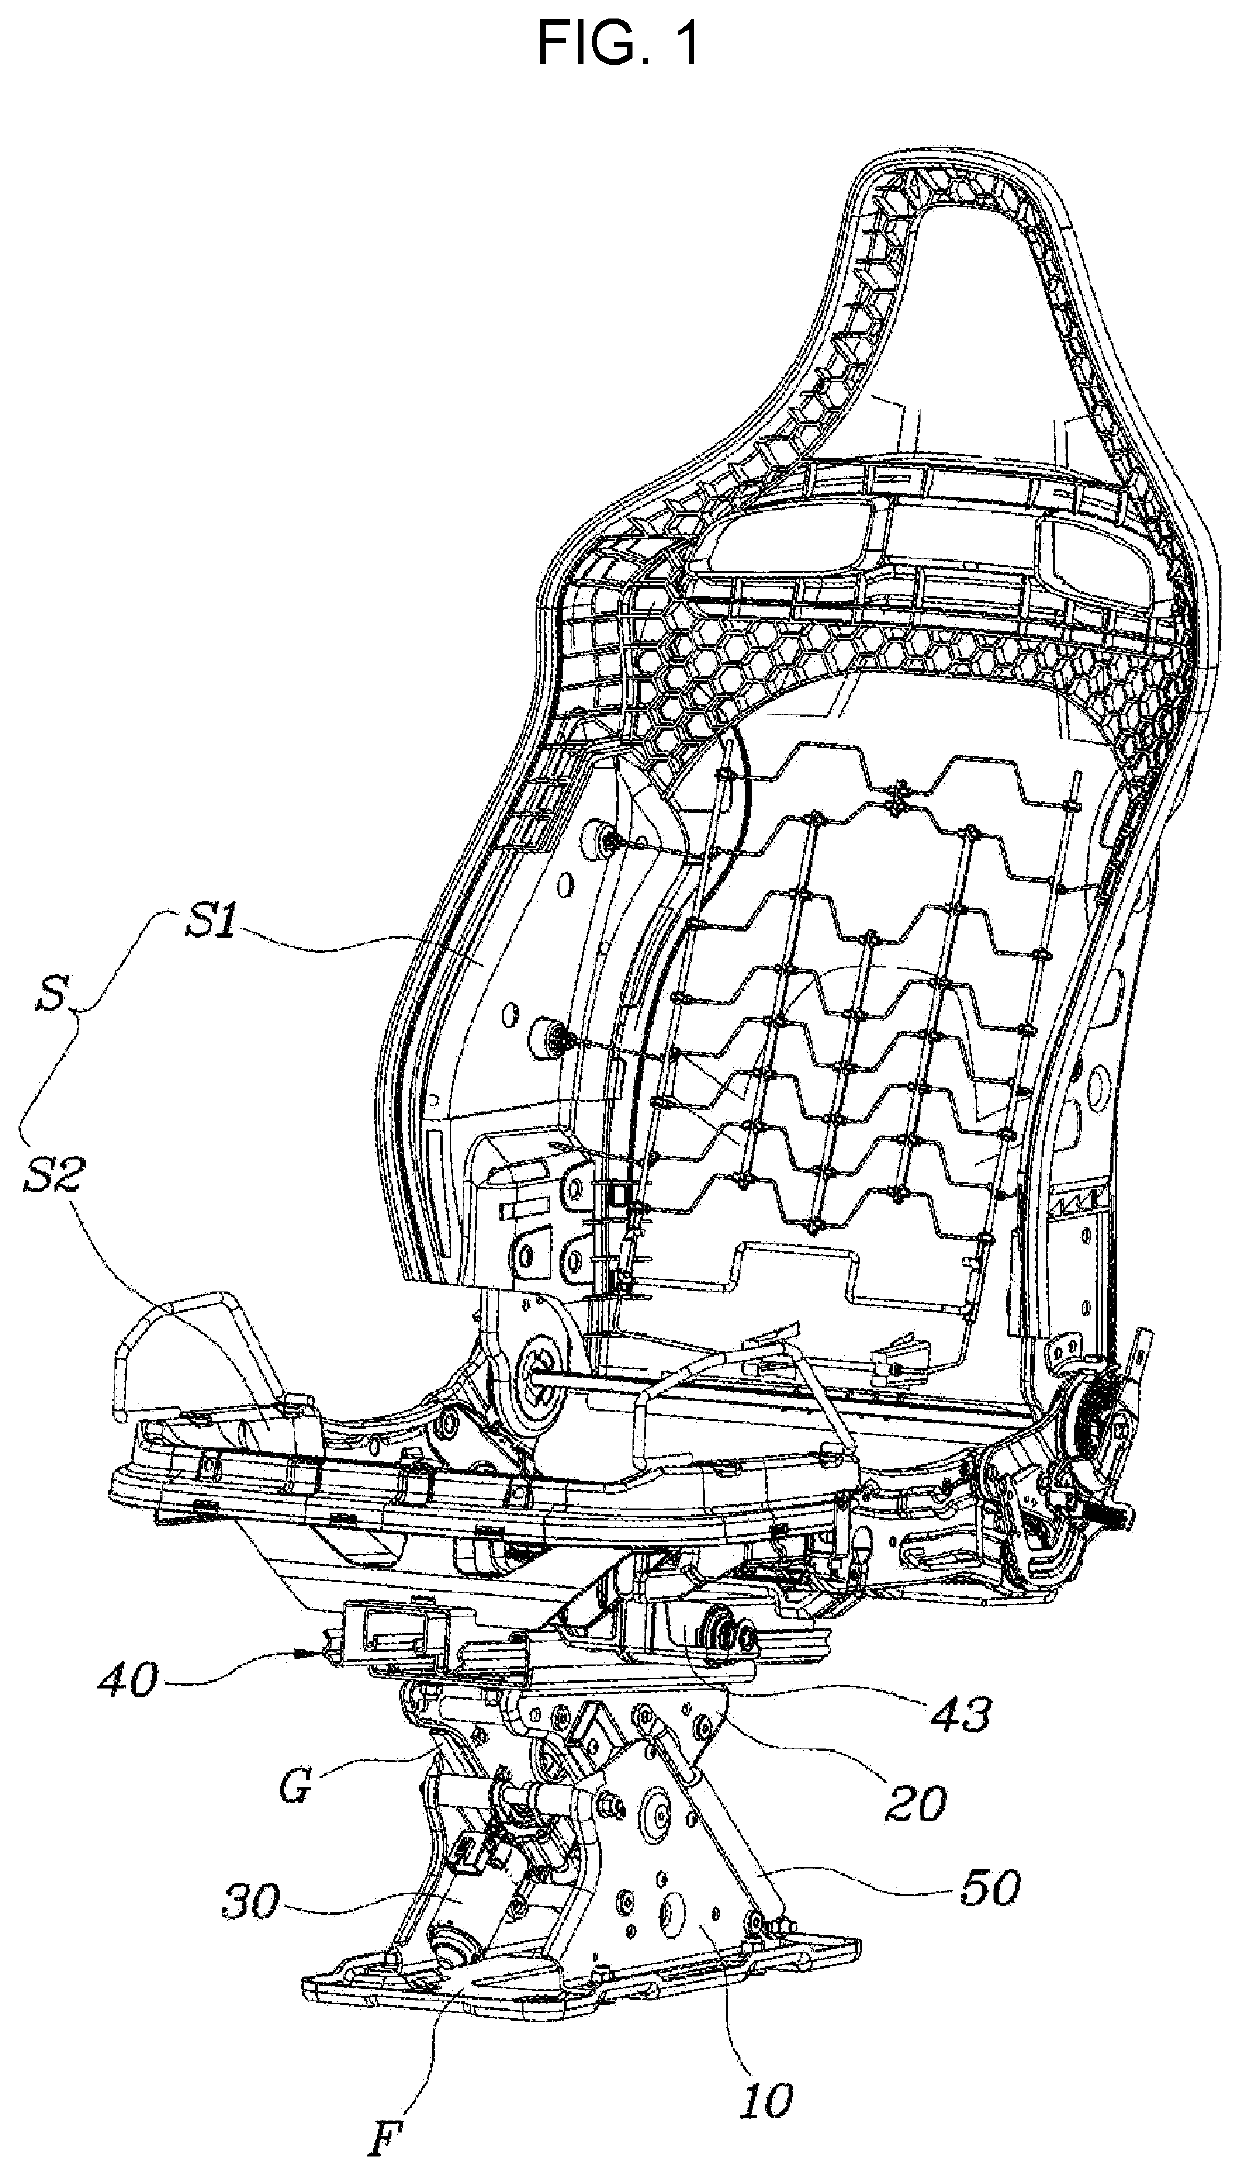 Seat apparatus for vehicle